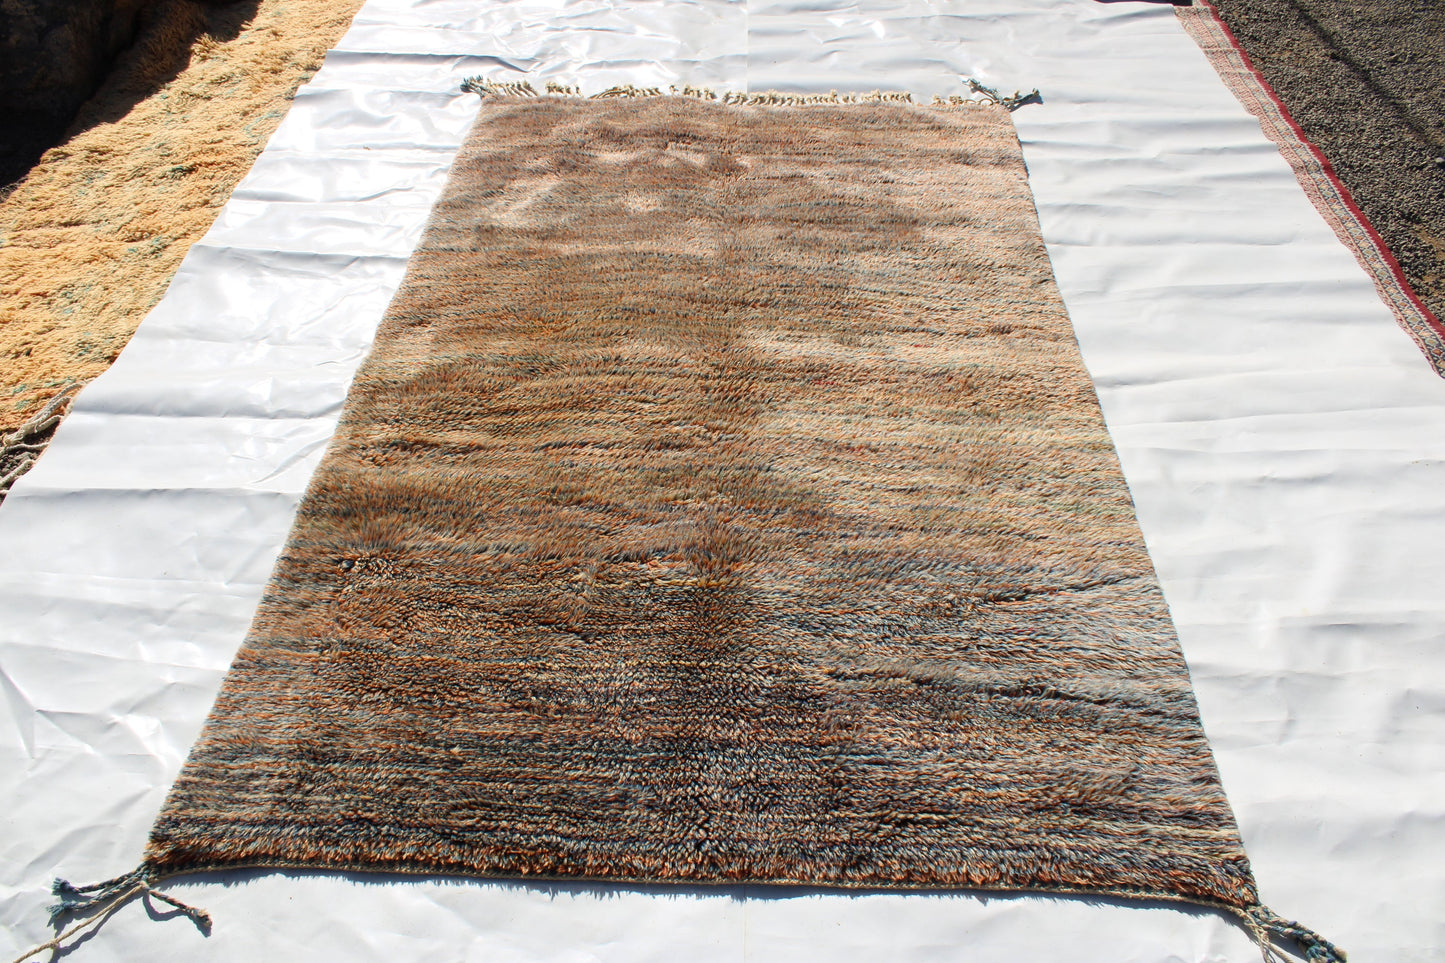 Beni Ourain rugs originate from the Atlas Mountains of Morocco and are characterized by their distinctive, neutral-toned, and geometric designs. These handwoven rugs often feature a plush pile and are made by the Berber tribes,  size is 250x155 cm